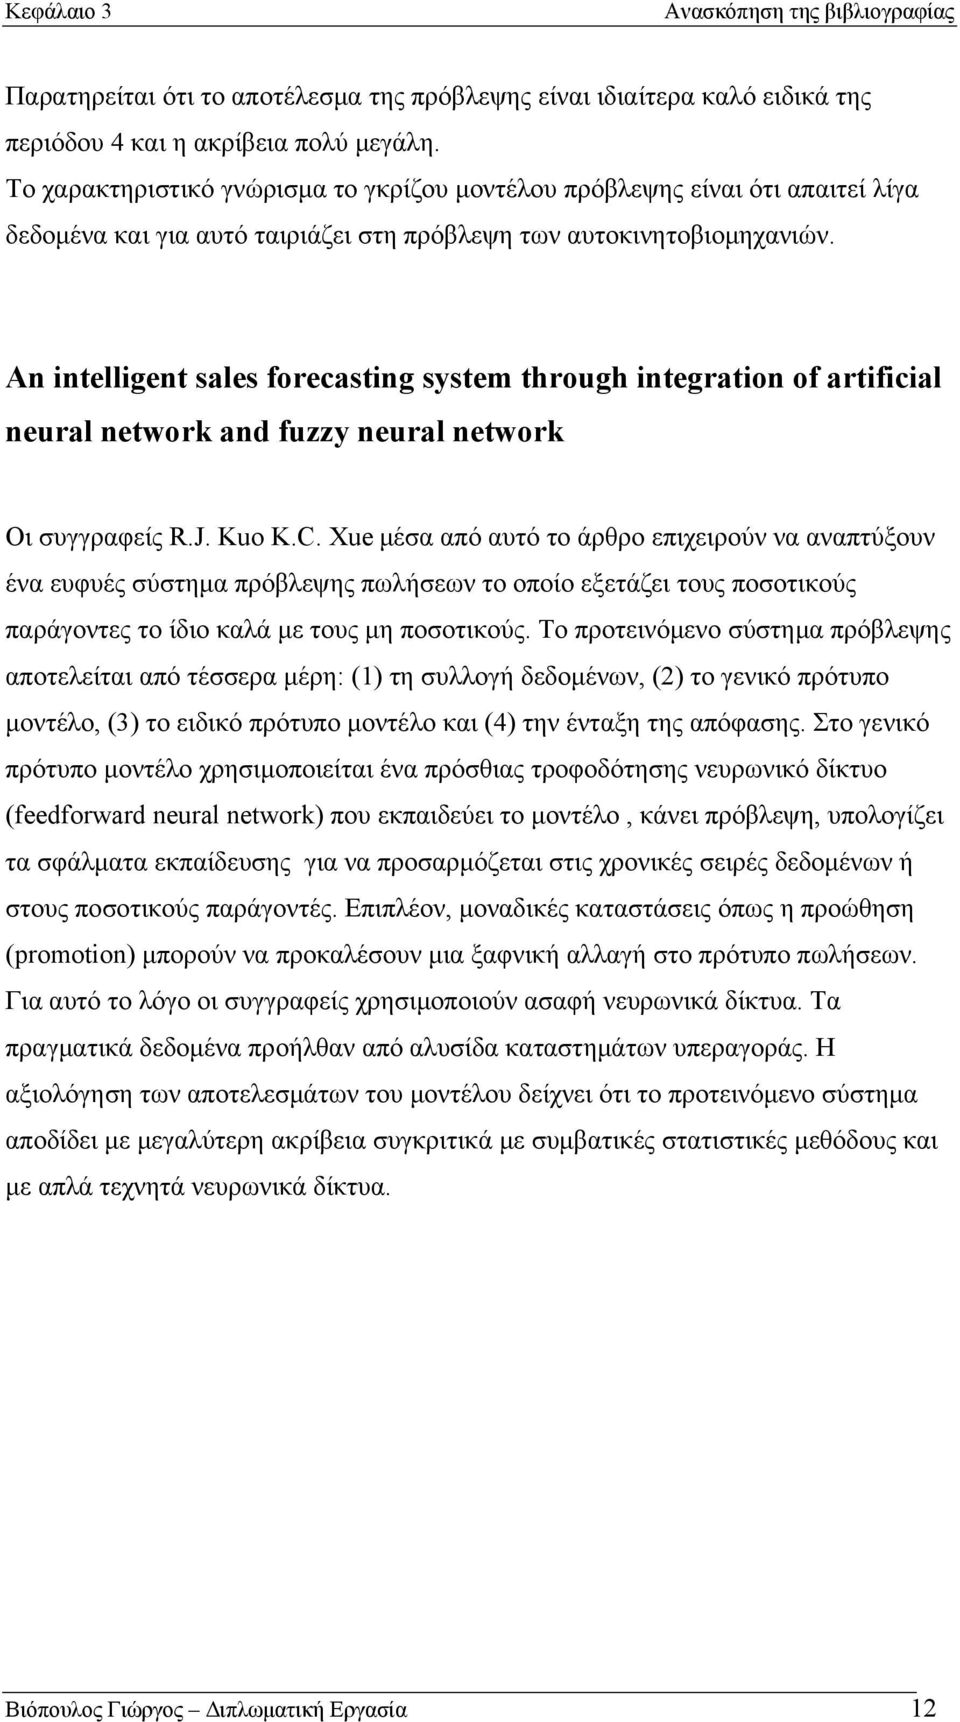 An intelligent sales forecasting system through integration of artificial neural network and fuzzy neural network Οι συγγραφείς R.J. Kuo K.C.